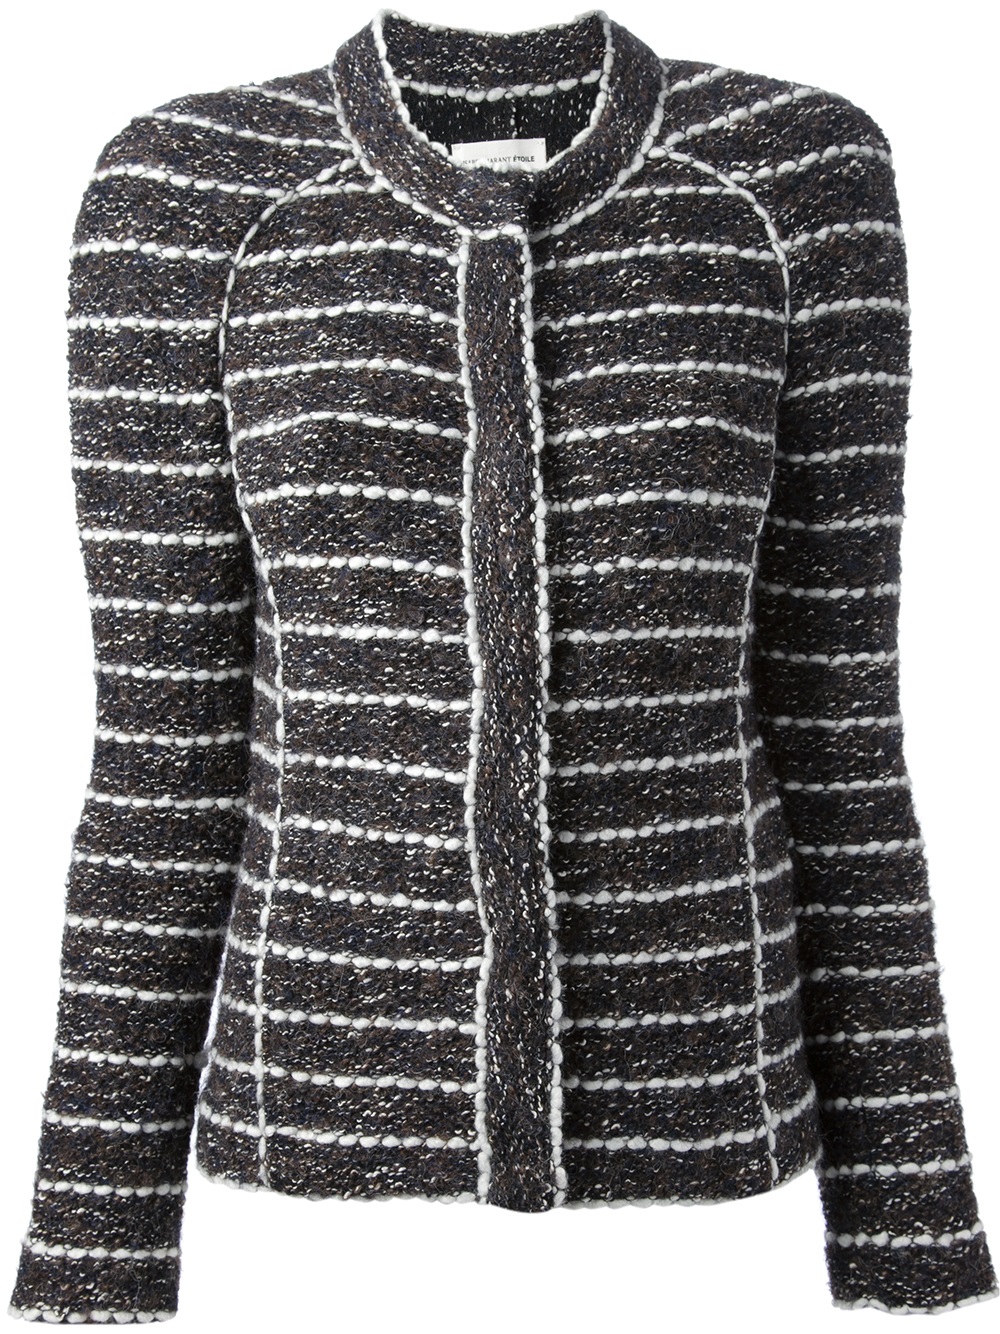 Lyst - Étoile isabel marant Iona Textured Cardigan in Gray